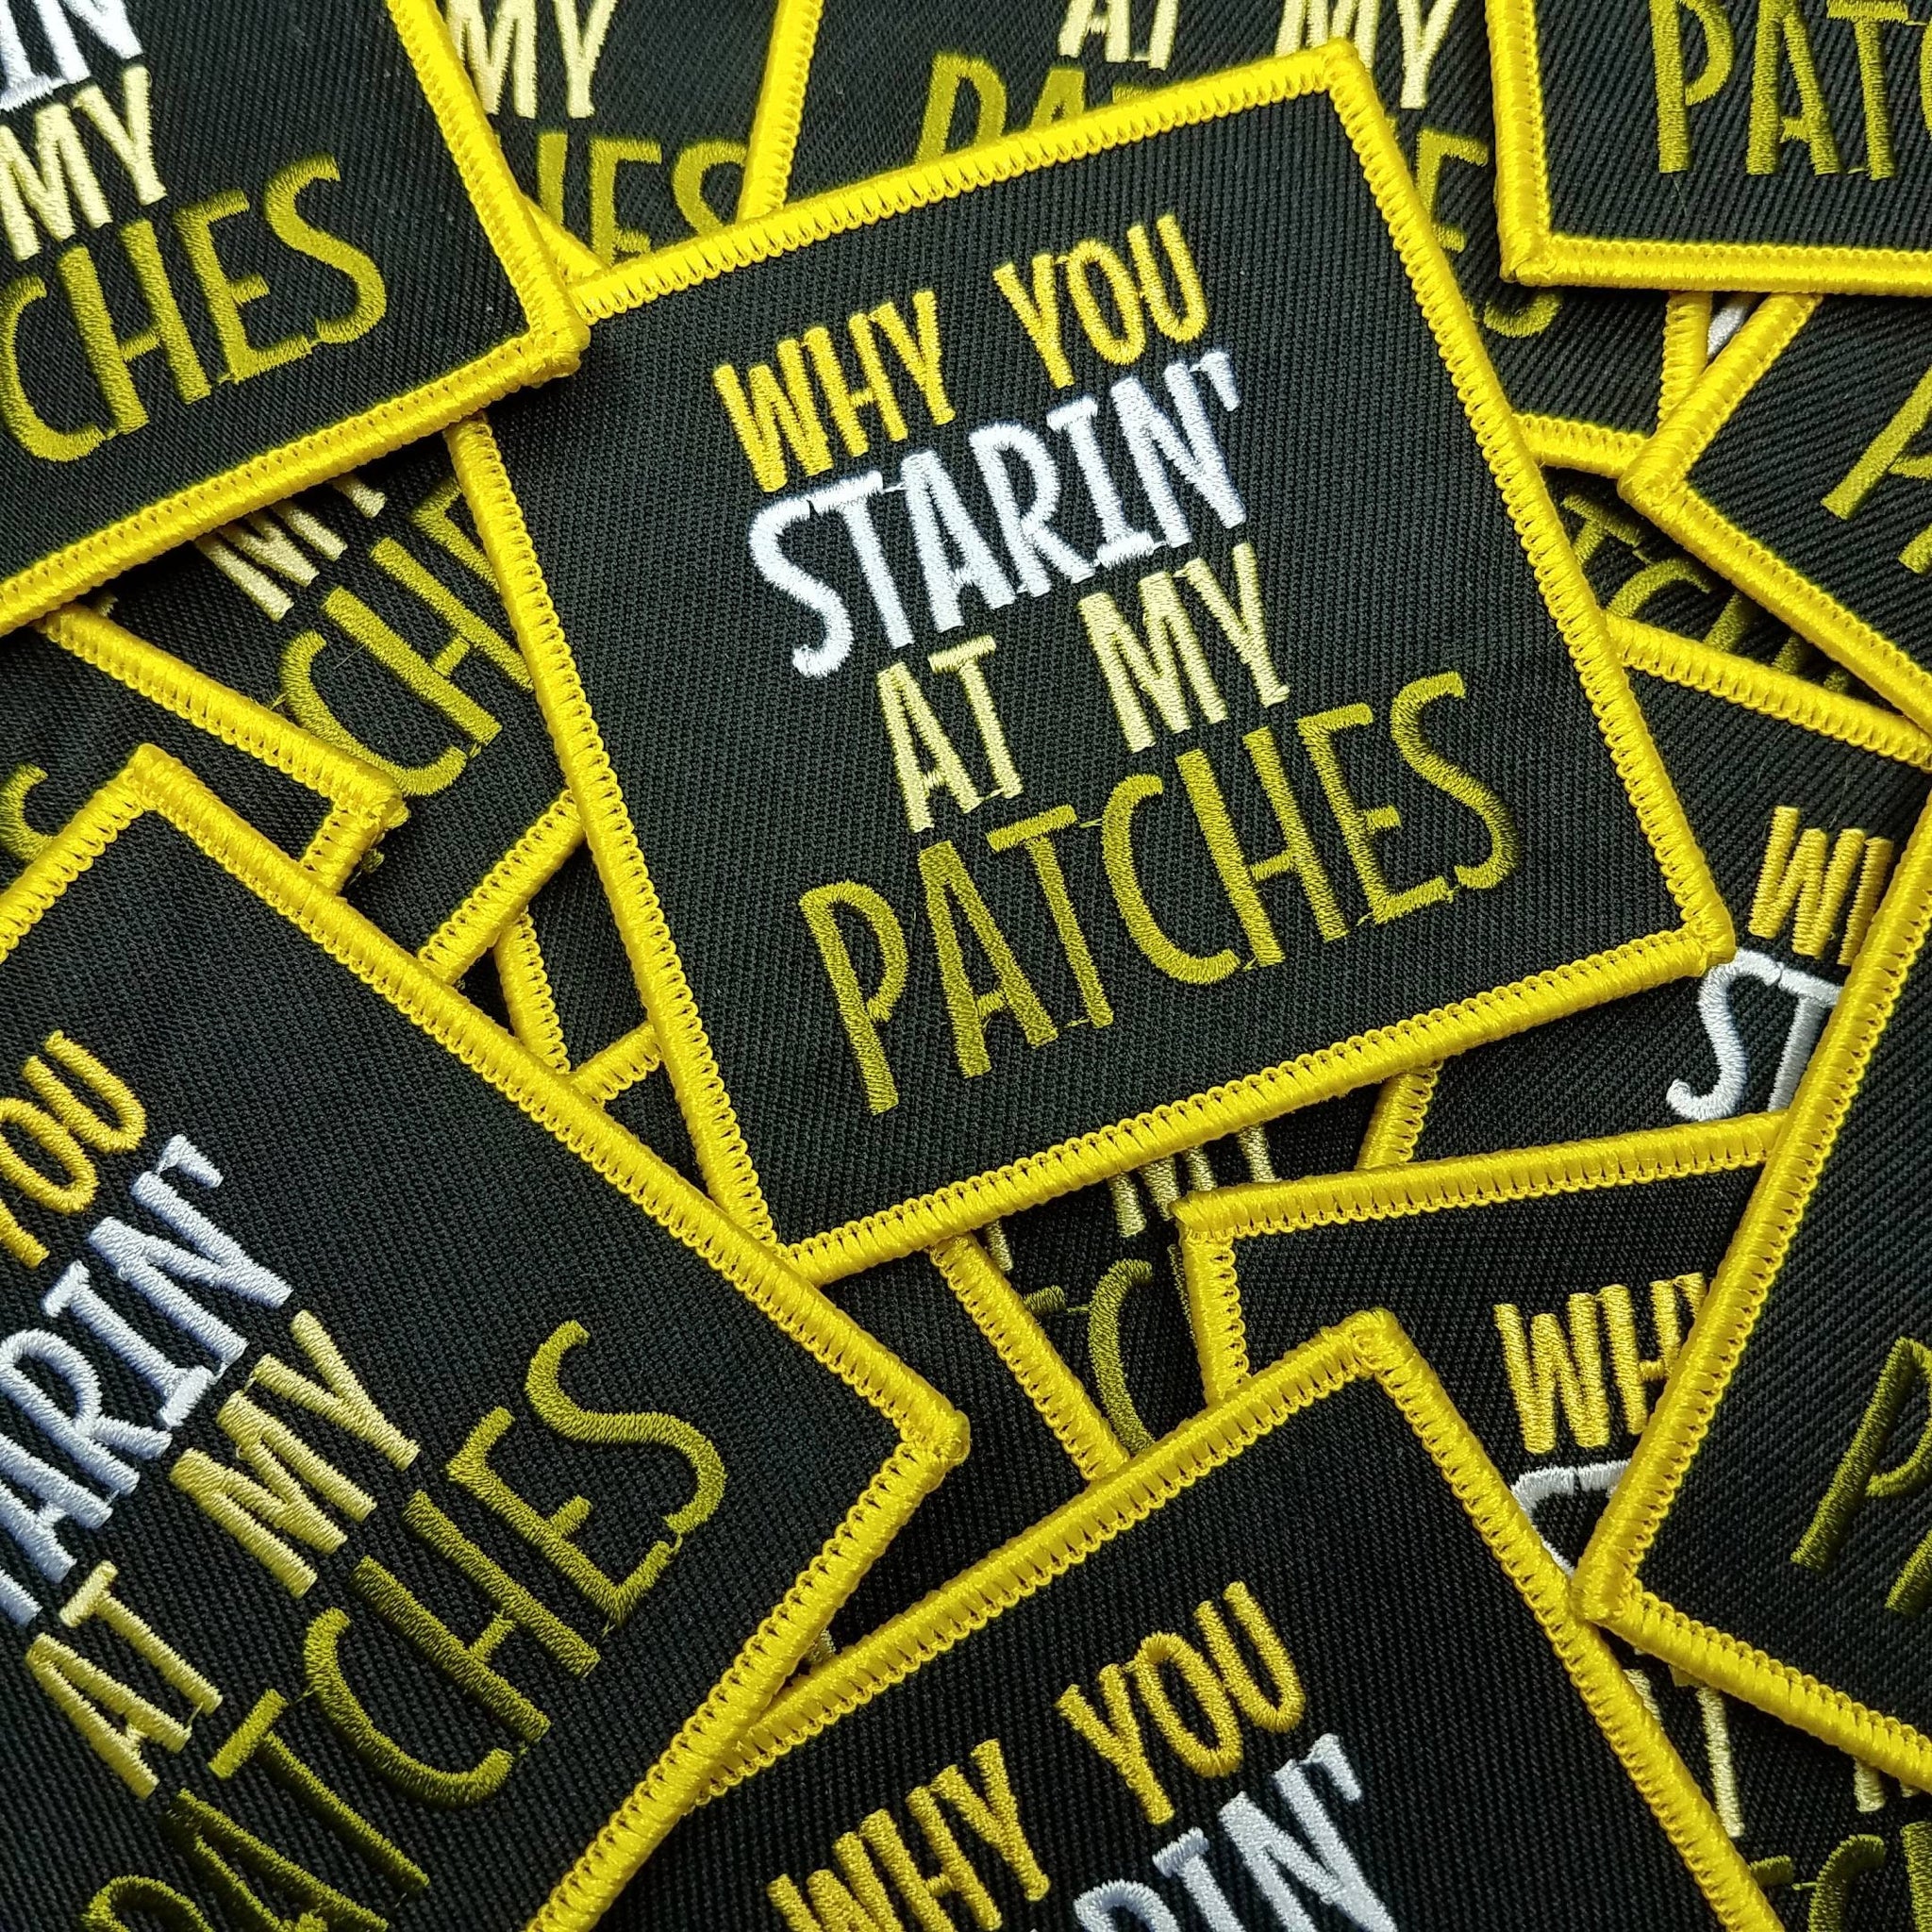 Iron-on, "Why you starin at my patches" iron-on, Patch/Applique, Yellow, Metallic Gold, and Black, Size 3x3-inch Embroidered Patch